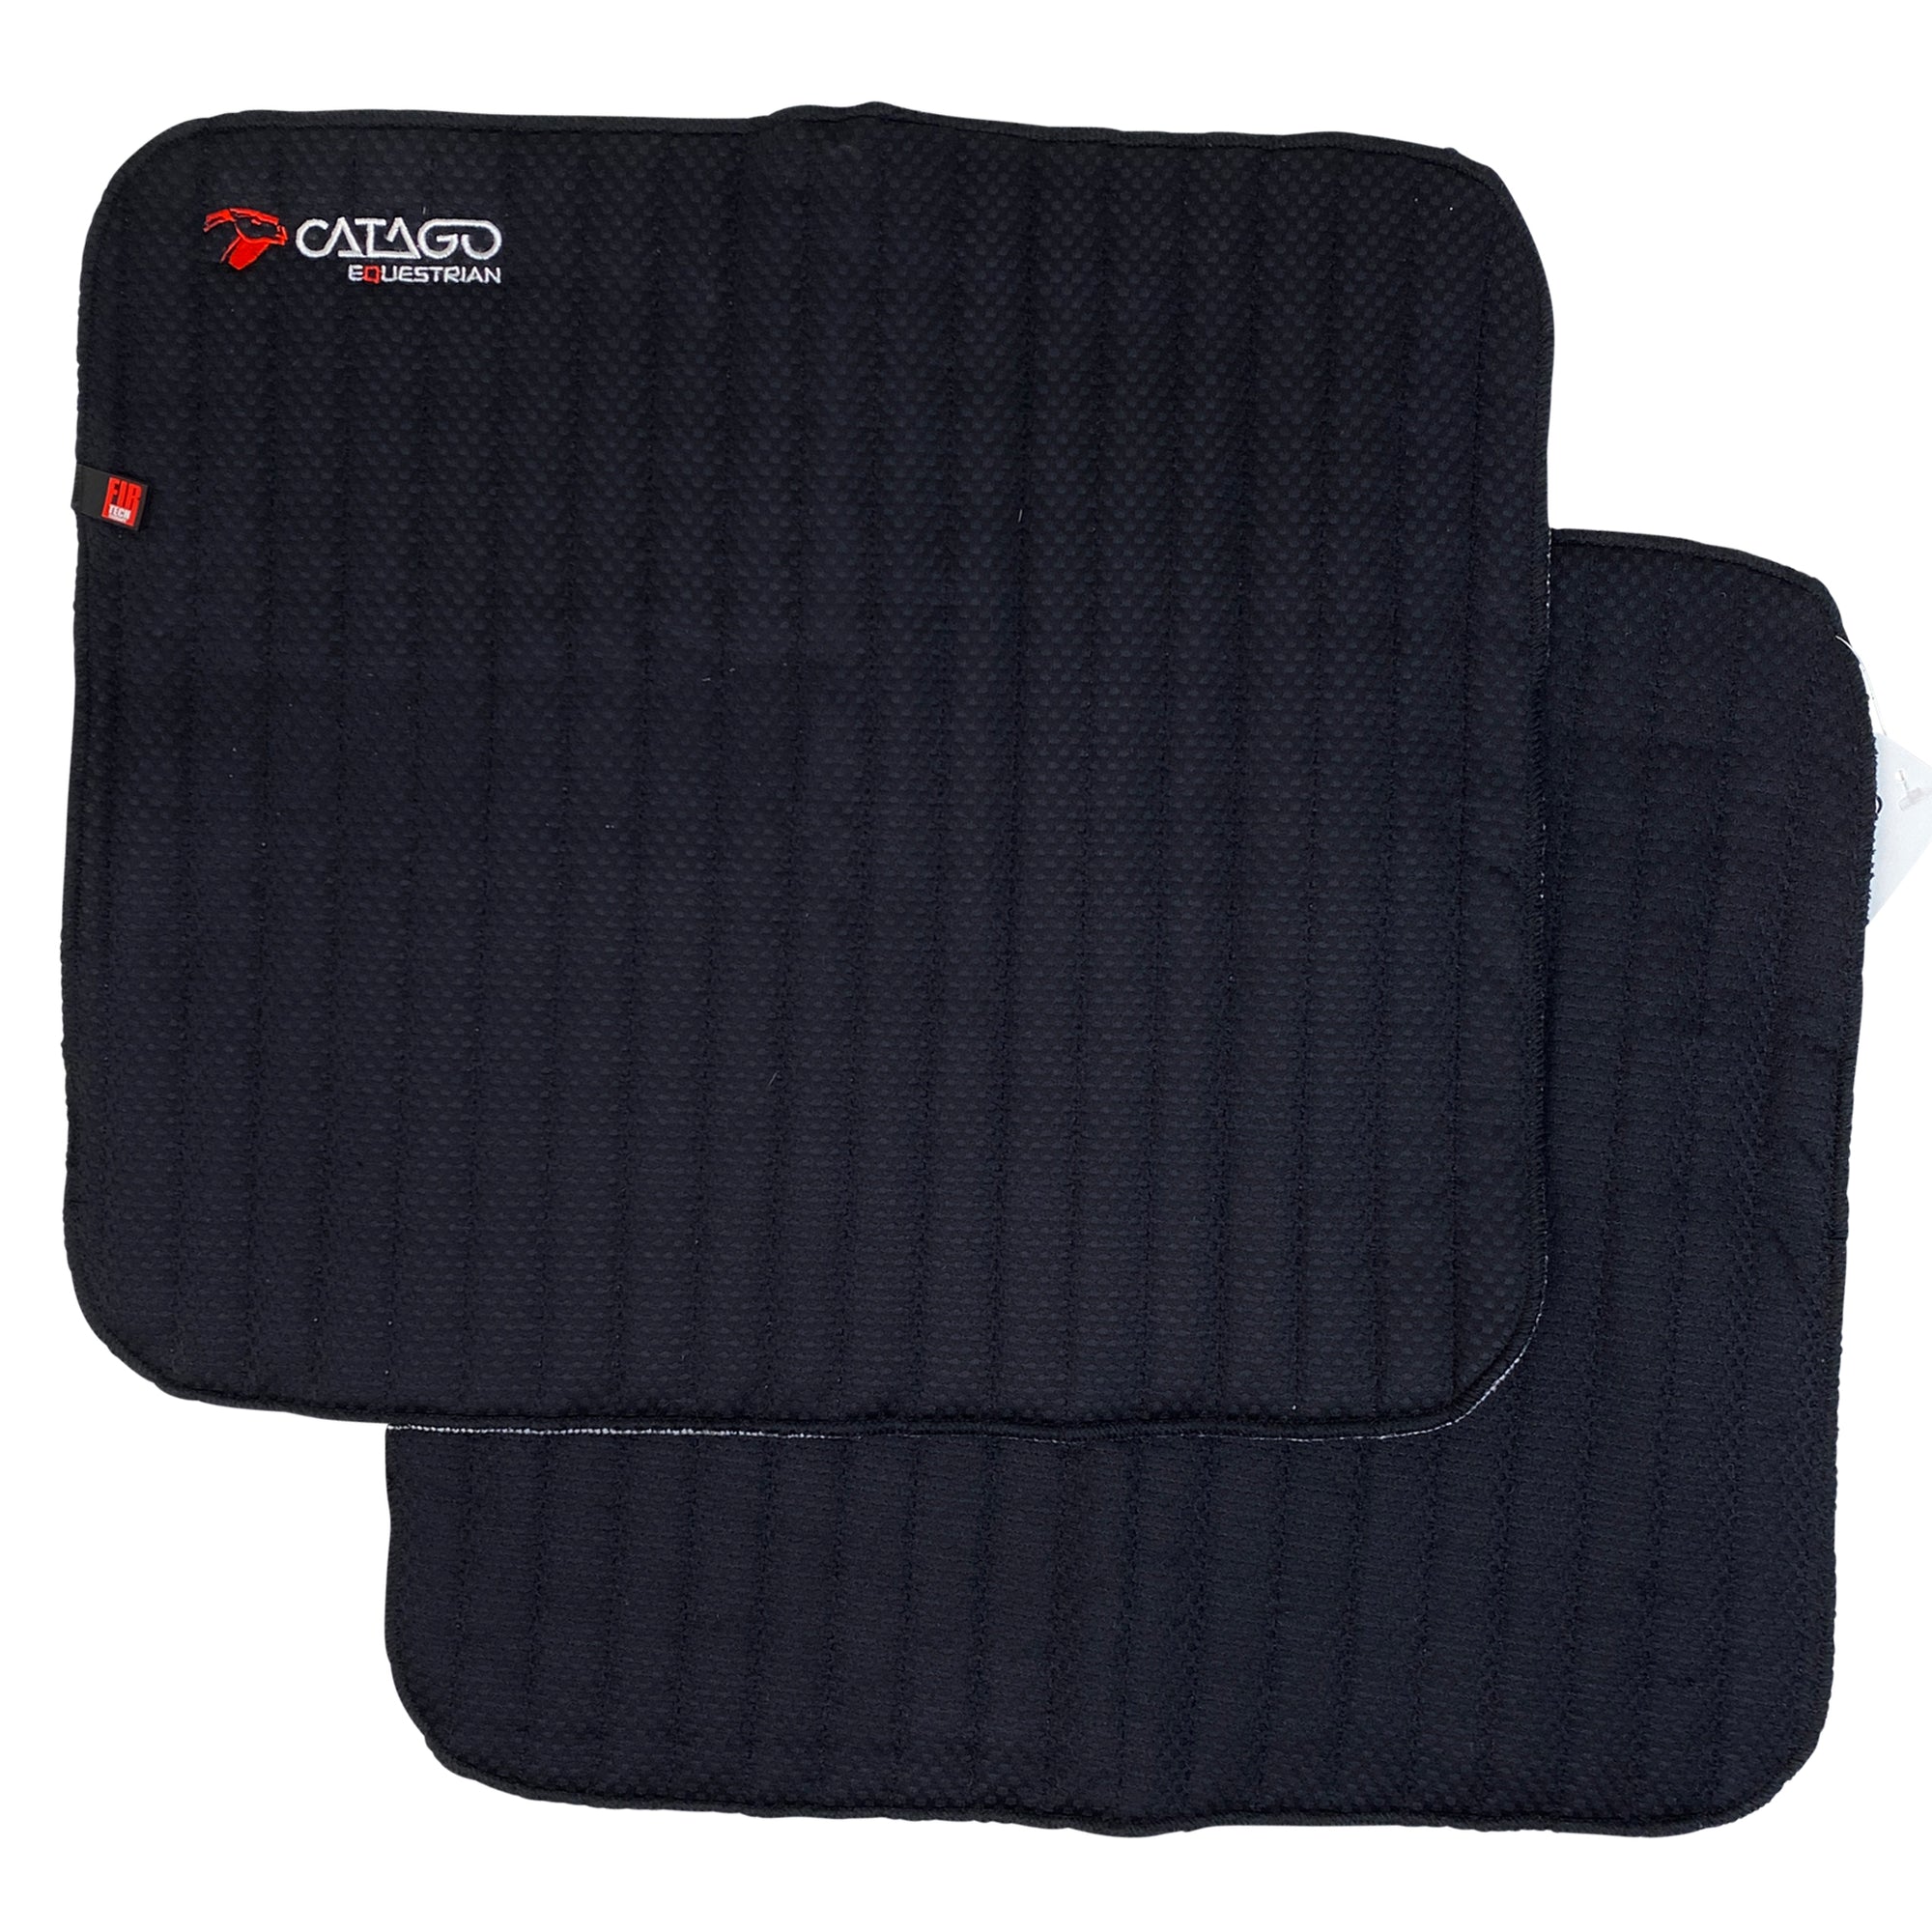 Catago FIR-Tech Thermo Therapy Wraps in Black